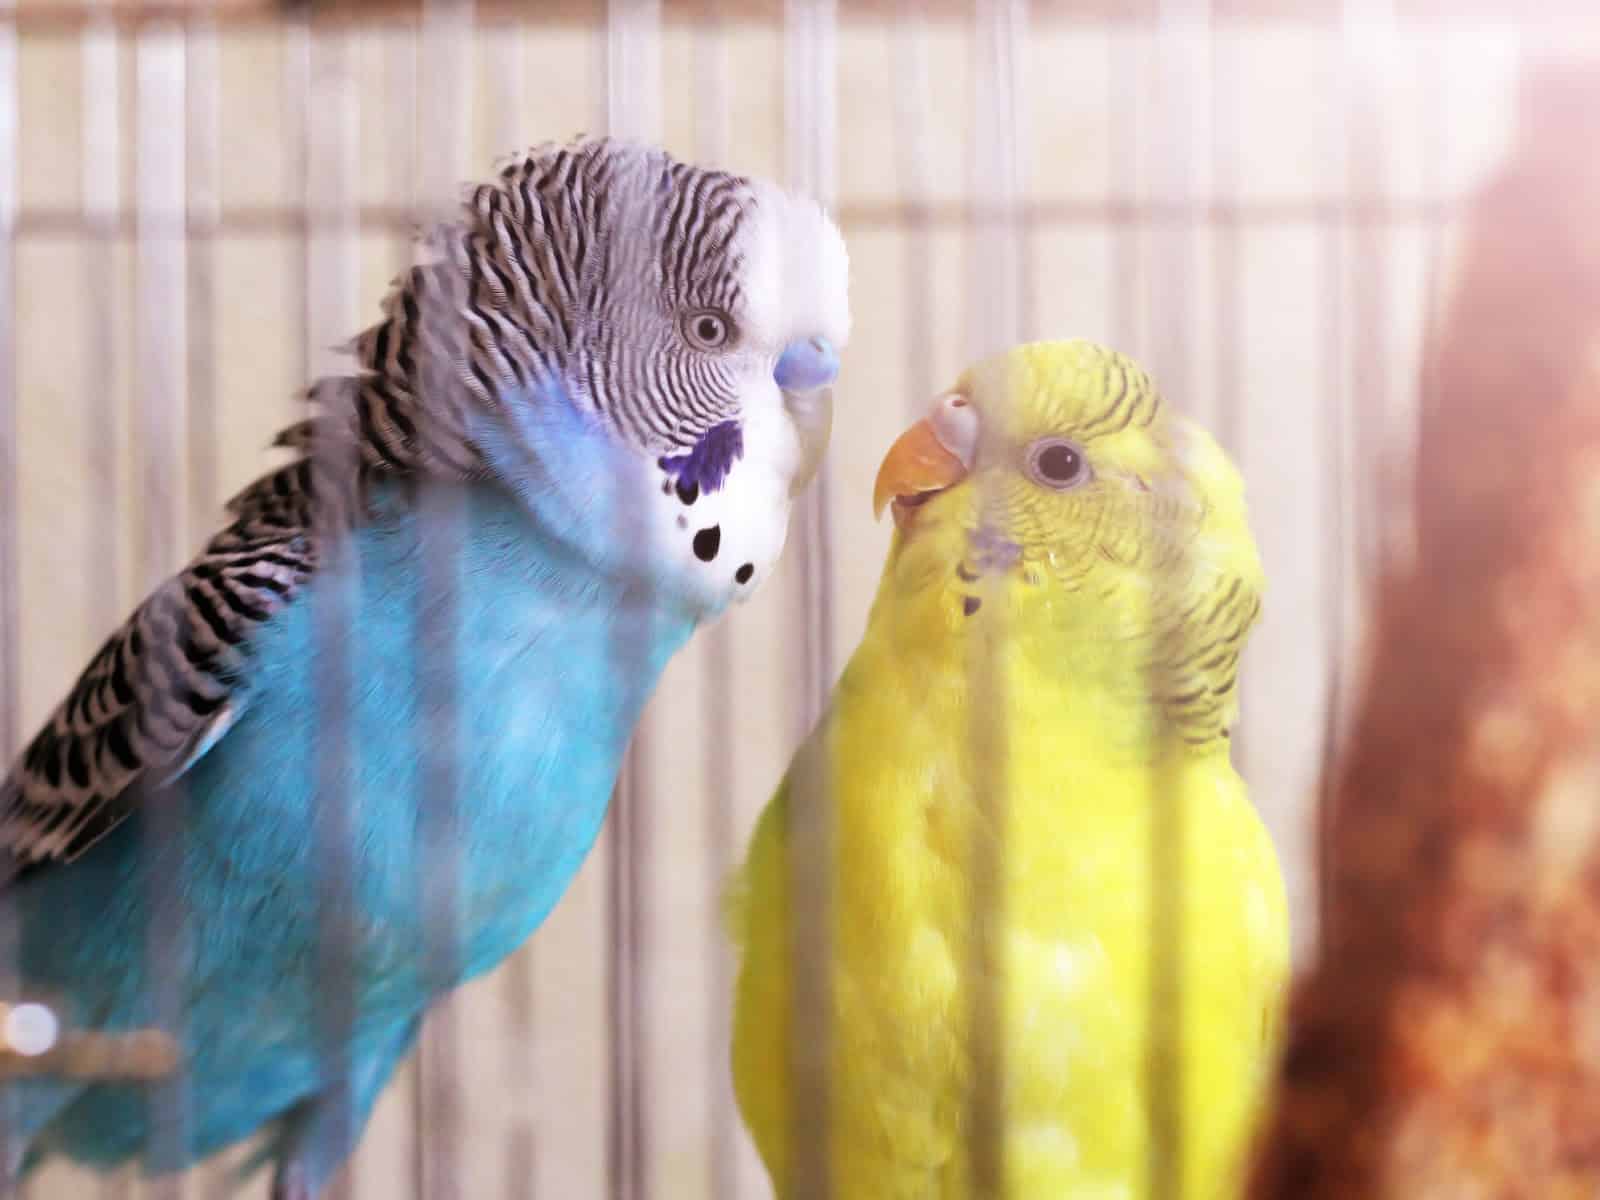 The Pregnant Budgie Guide at Petrestart.com.